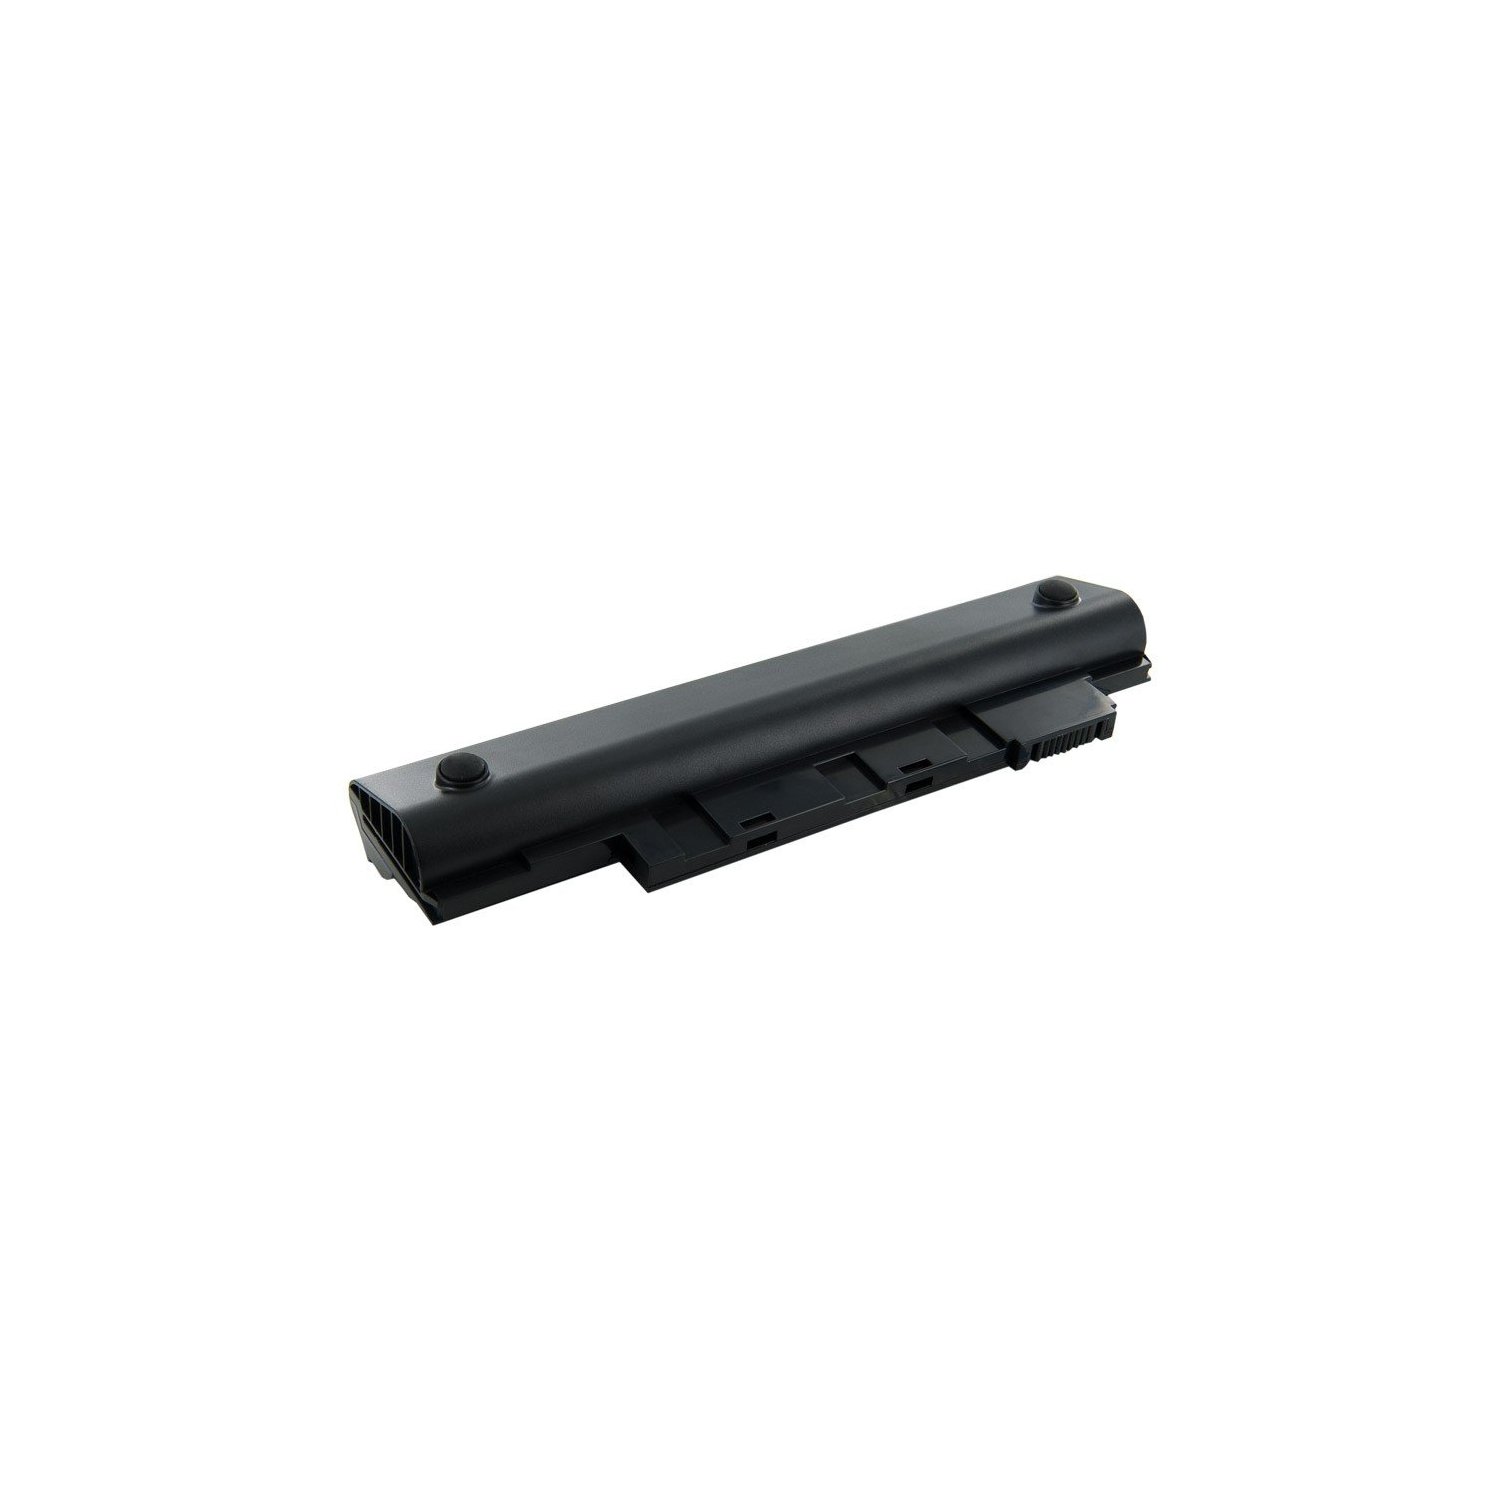 Acer Aspire One D260: New Laptop Replacement Battery for ACER Aspire One D260 Aspire One D260-2028 Aspire One D260-2097,6 cells